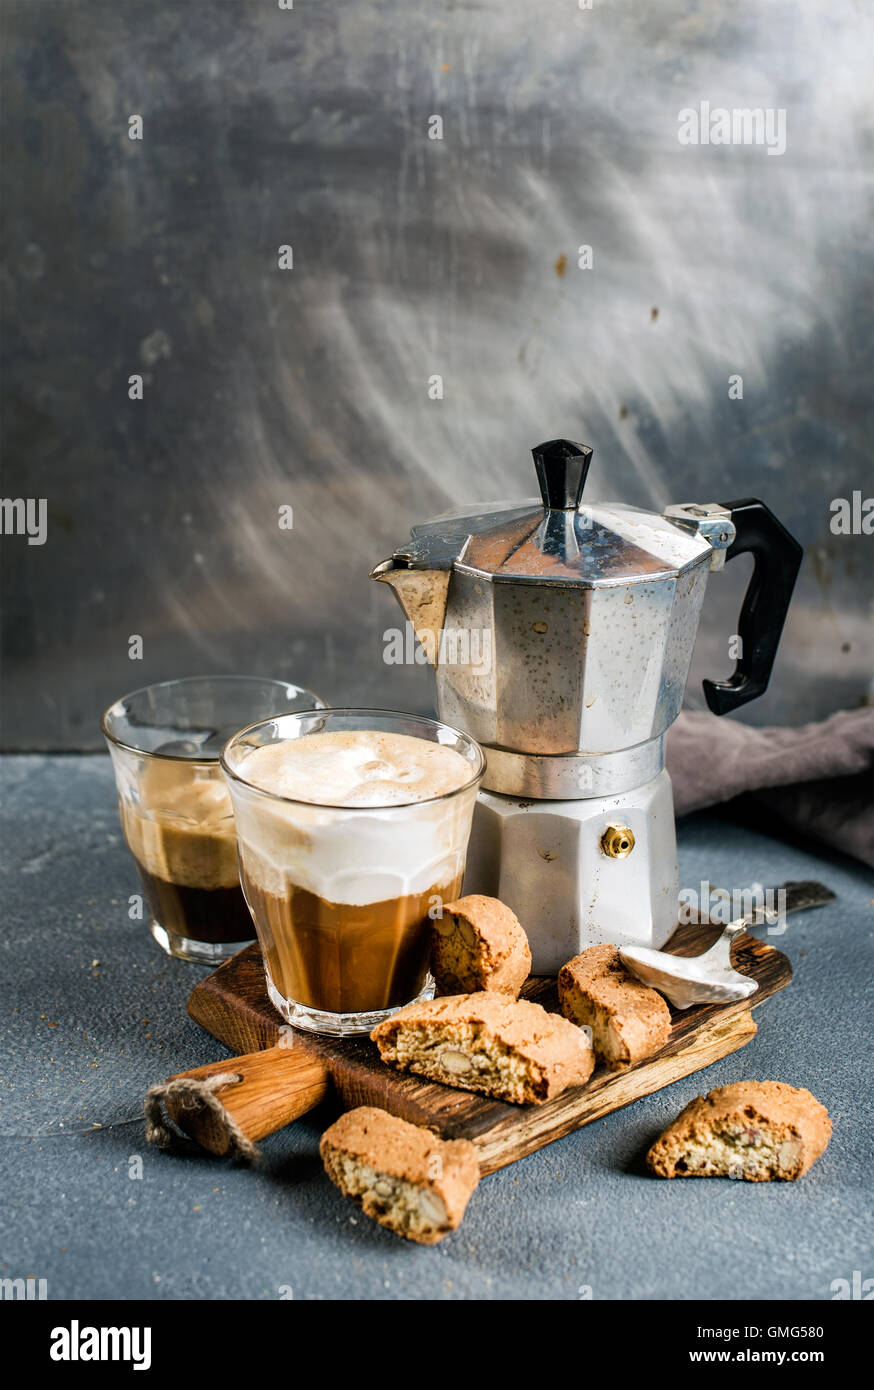 Glass of latte coffee on rustic wooden board, cantucci biscuits and steel Italian Moka pot, grey background Stock Photo